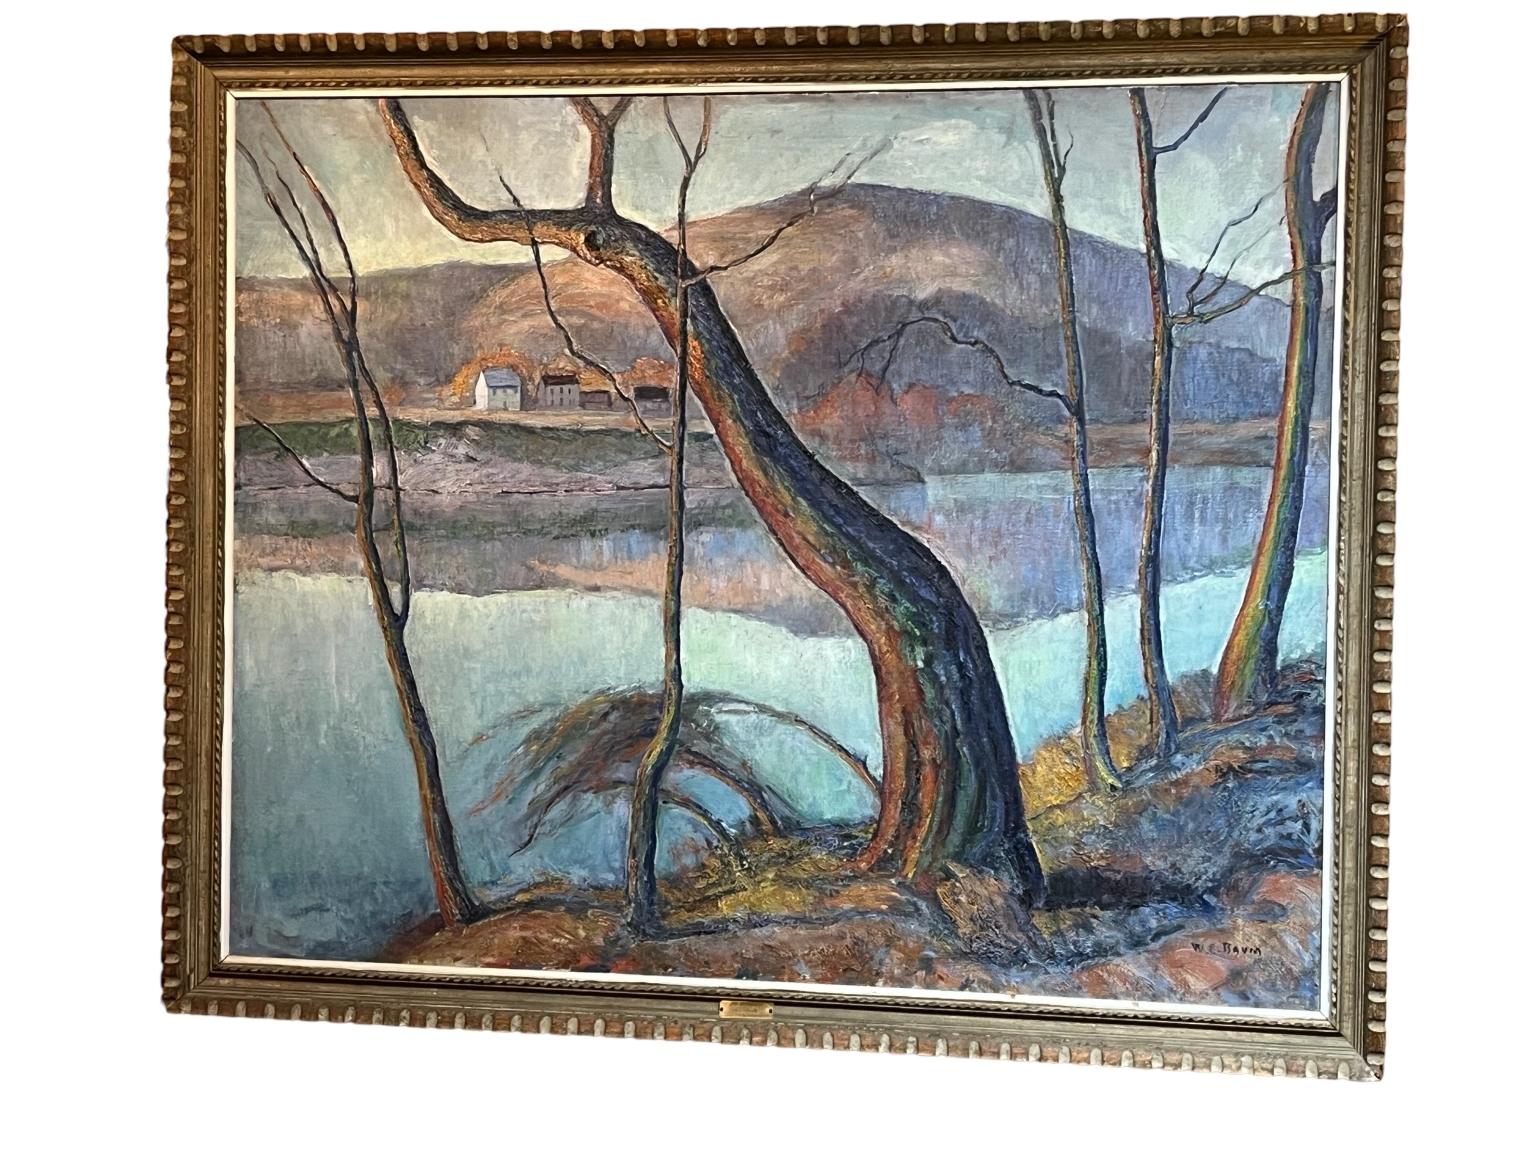 Canvas Walter Emerson Baum Painting Titled The Delaware Circa 1930’s-40 For Sale